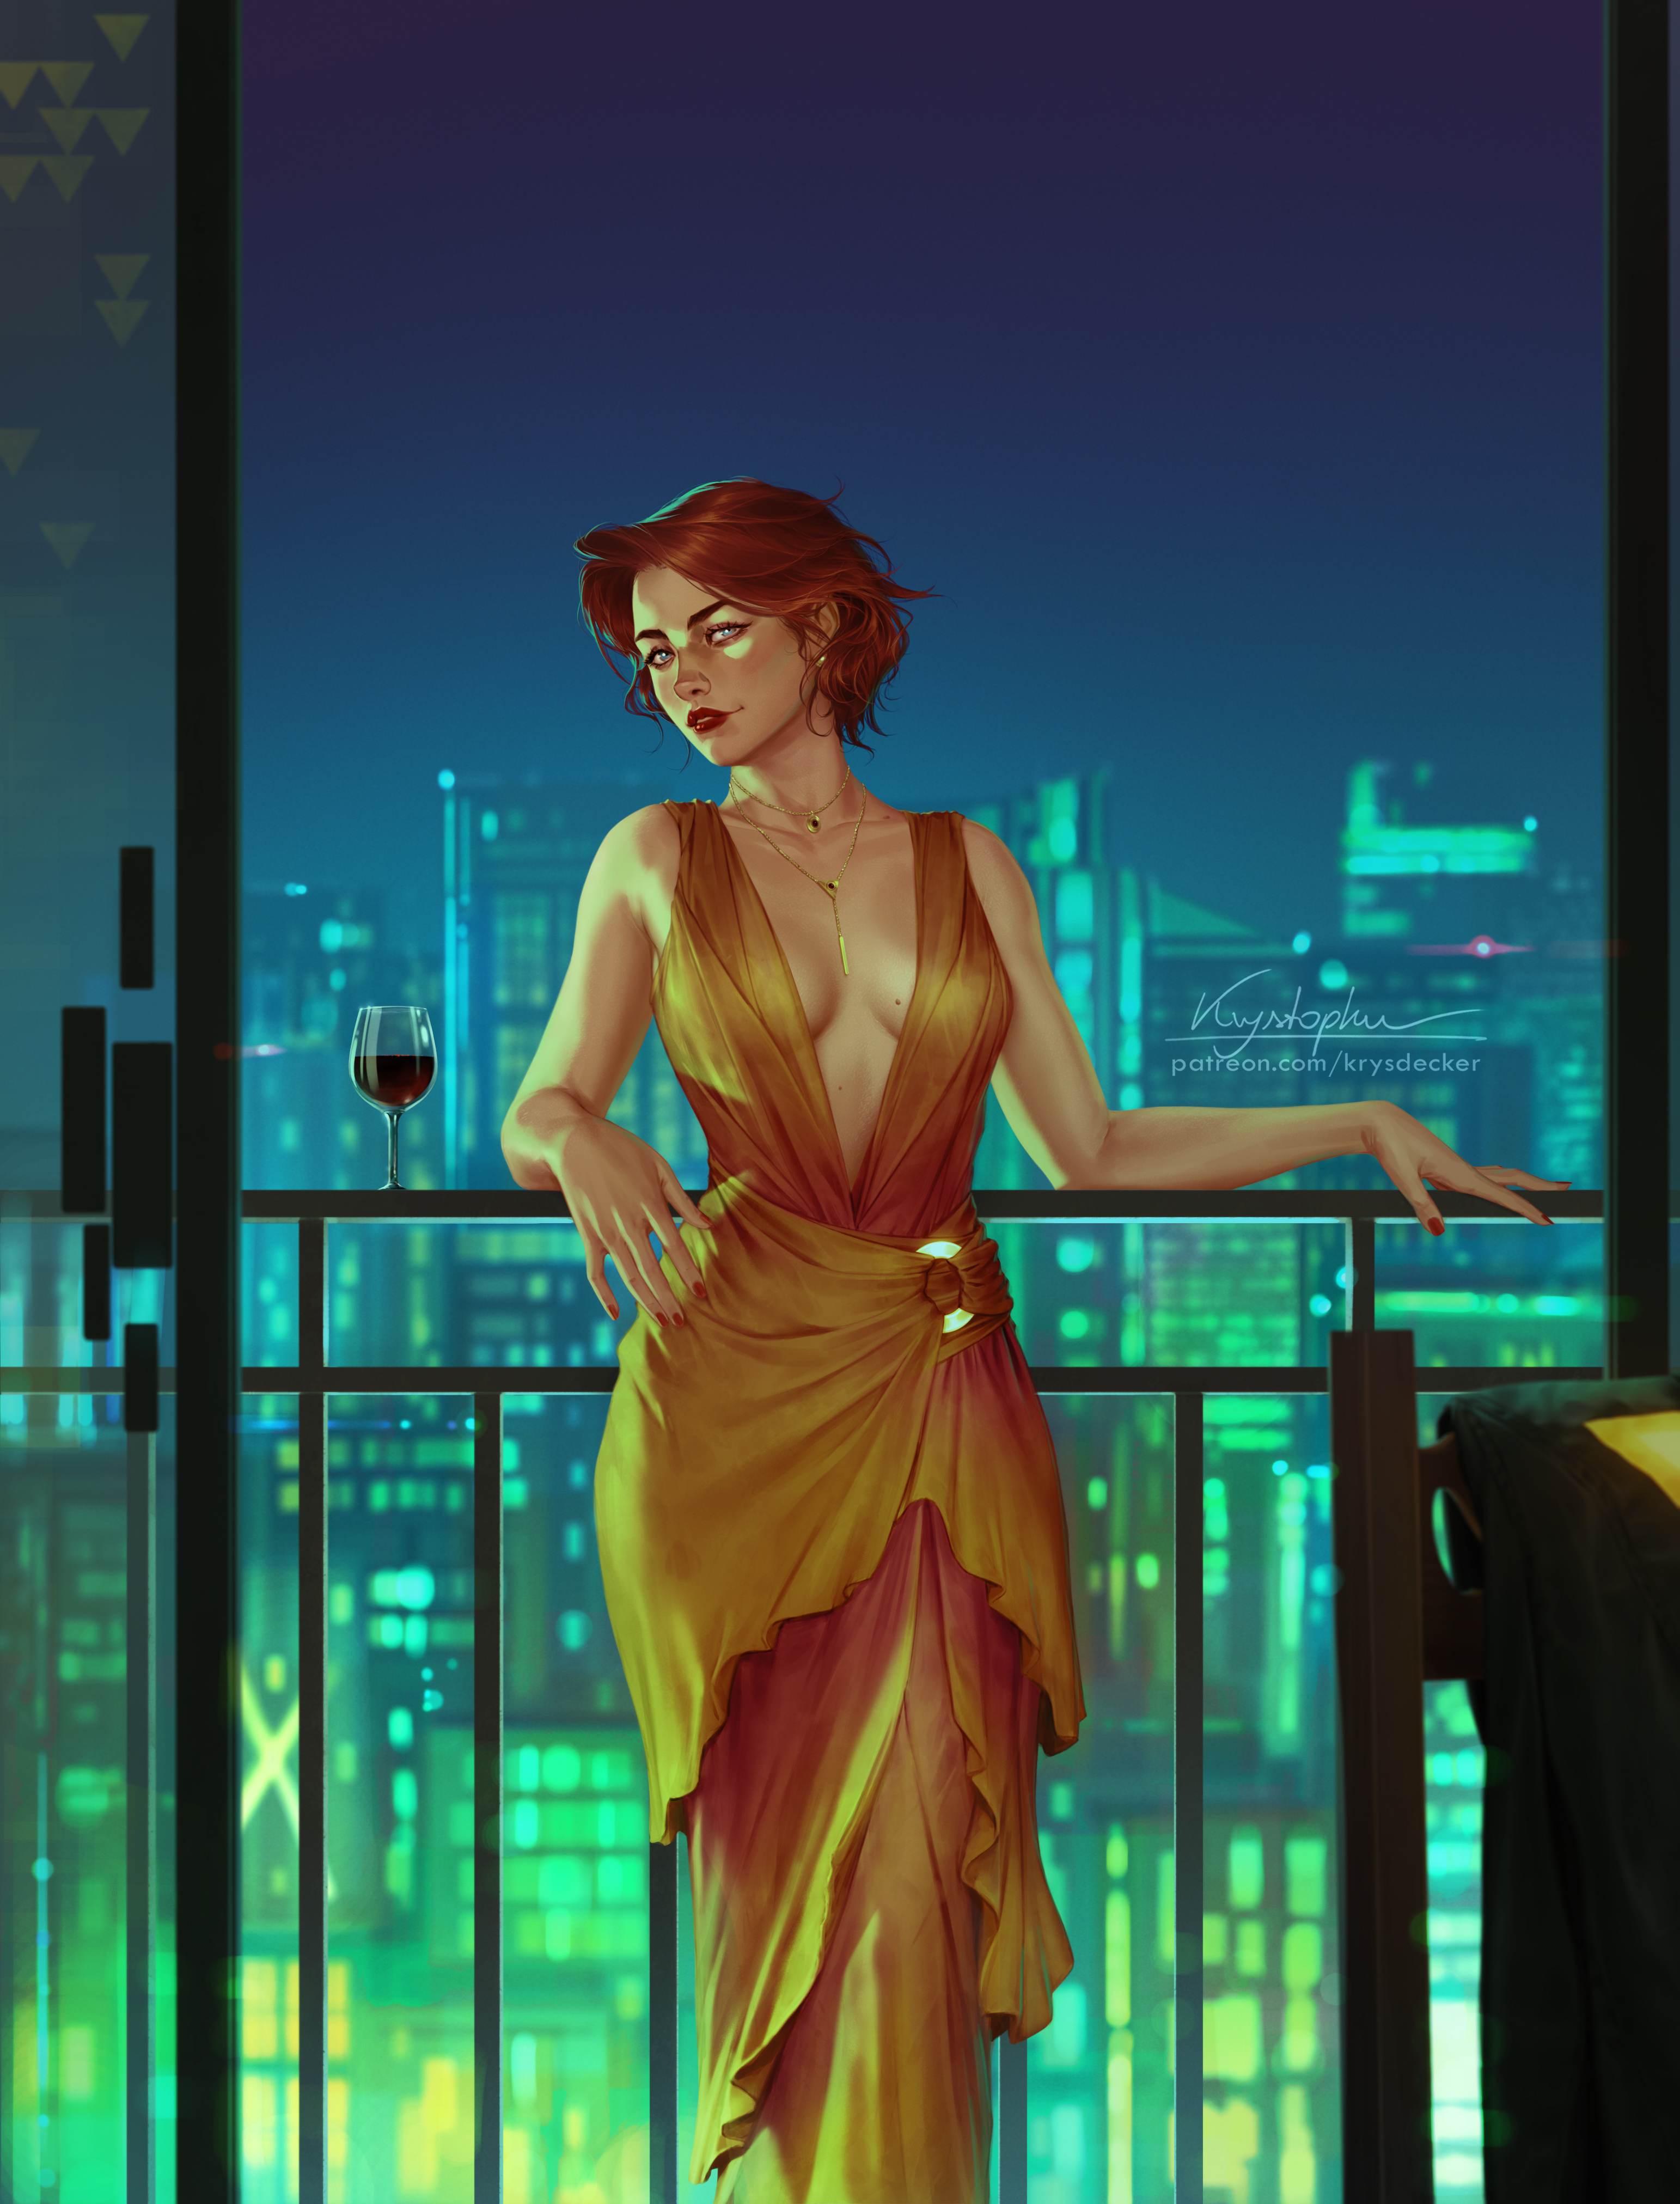 General 3085x4047 Red (Transistor) Transistor video games video game girls redhead video game characters looking at viewer parted lips red lipstick cleavage dress artwork drawing illustration fan art Krys Decker portrait display